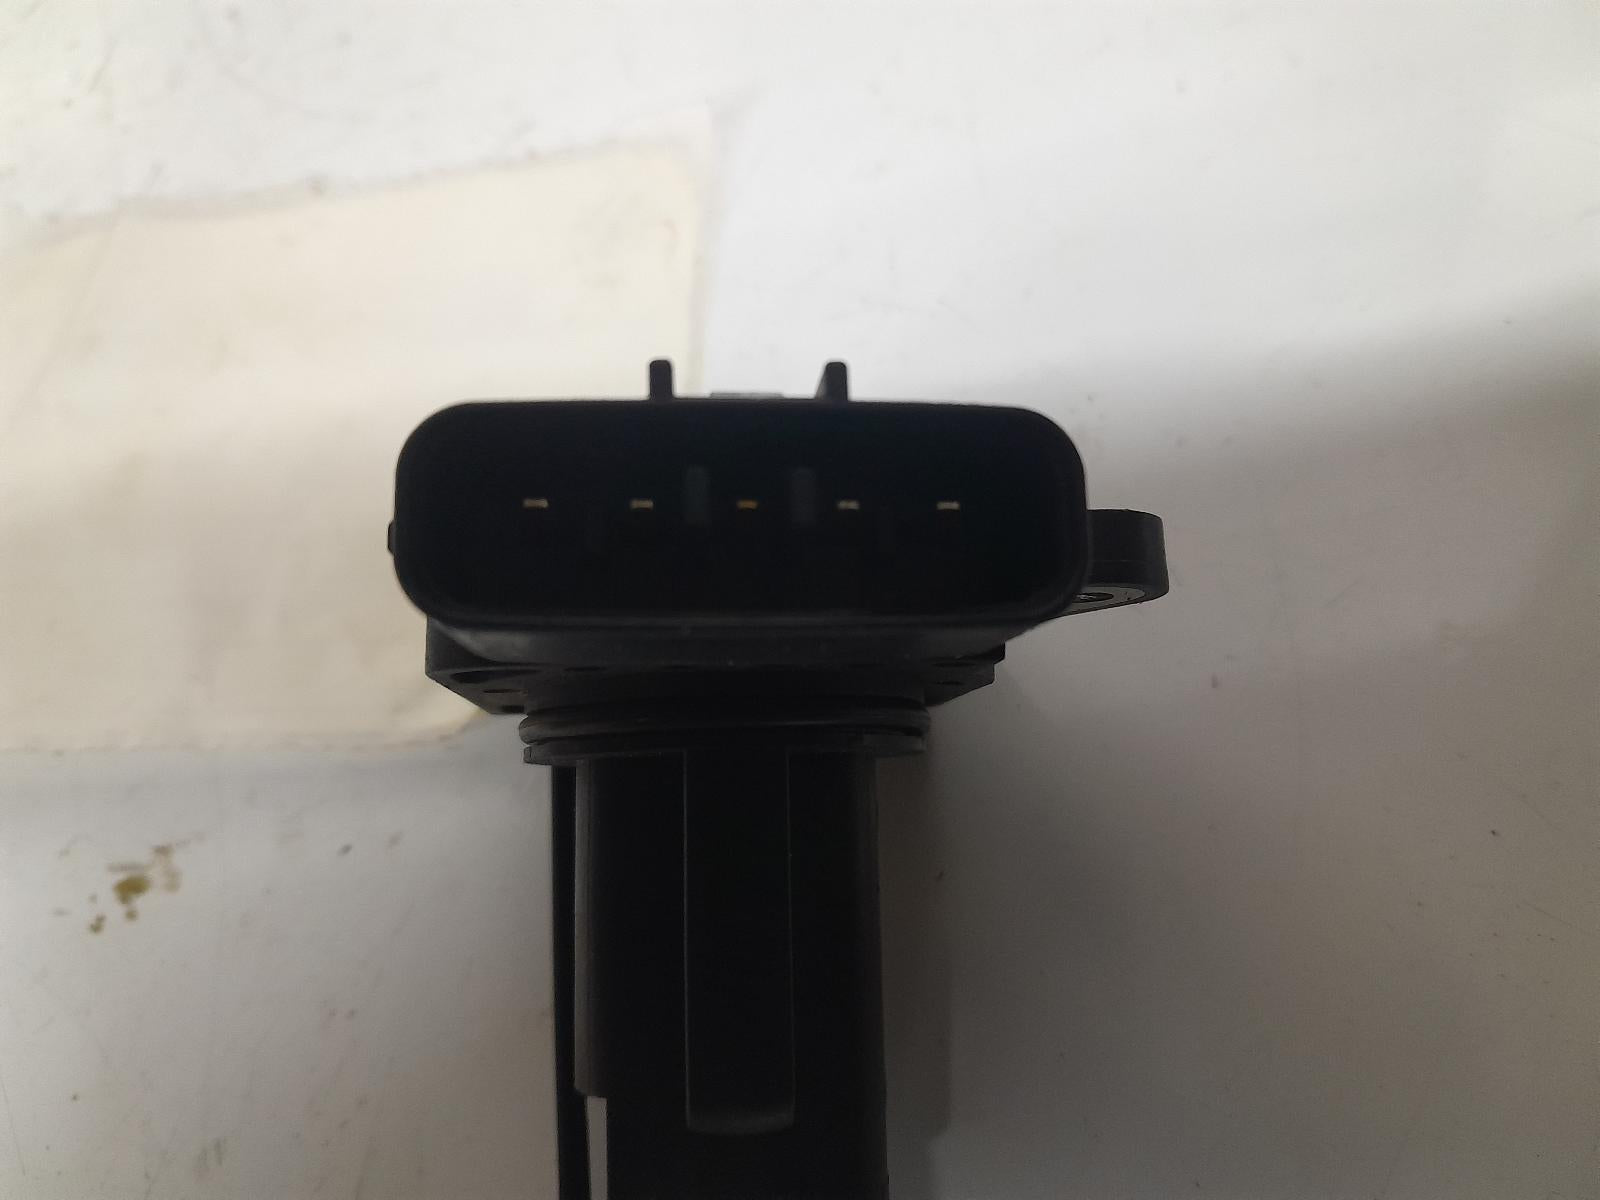 Ford Escape Air Flow Meter